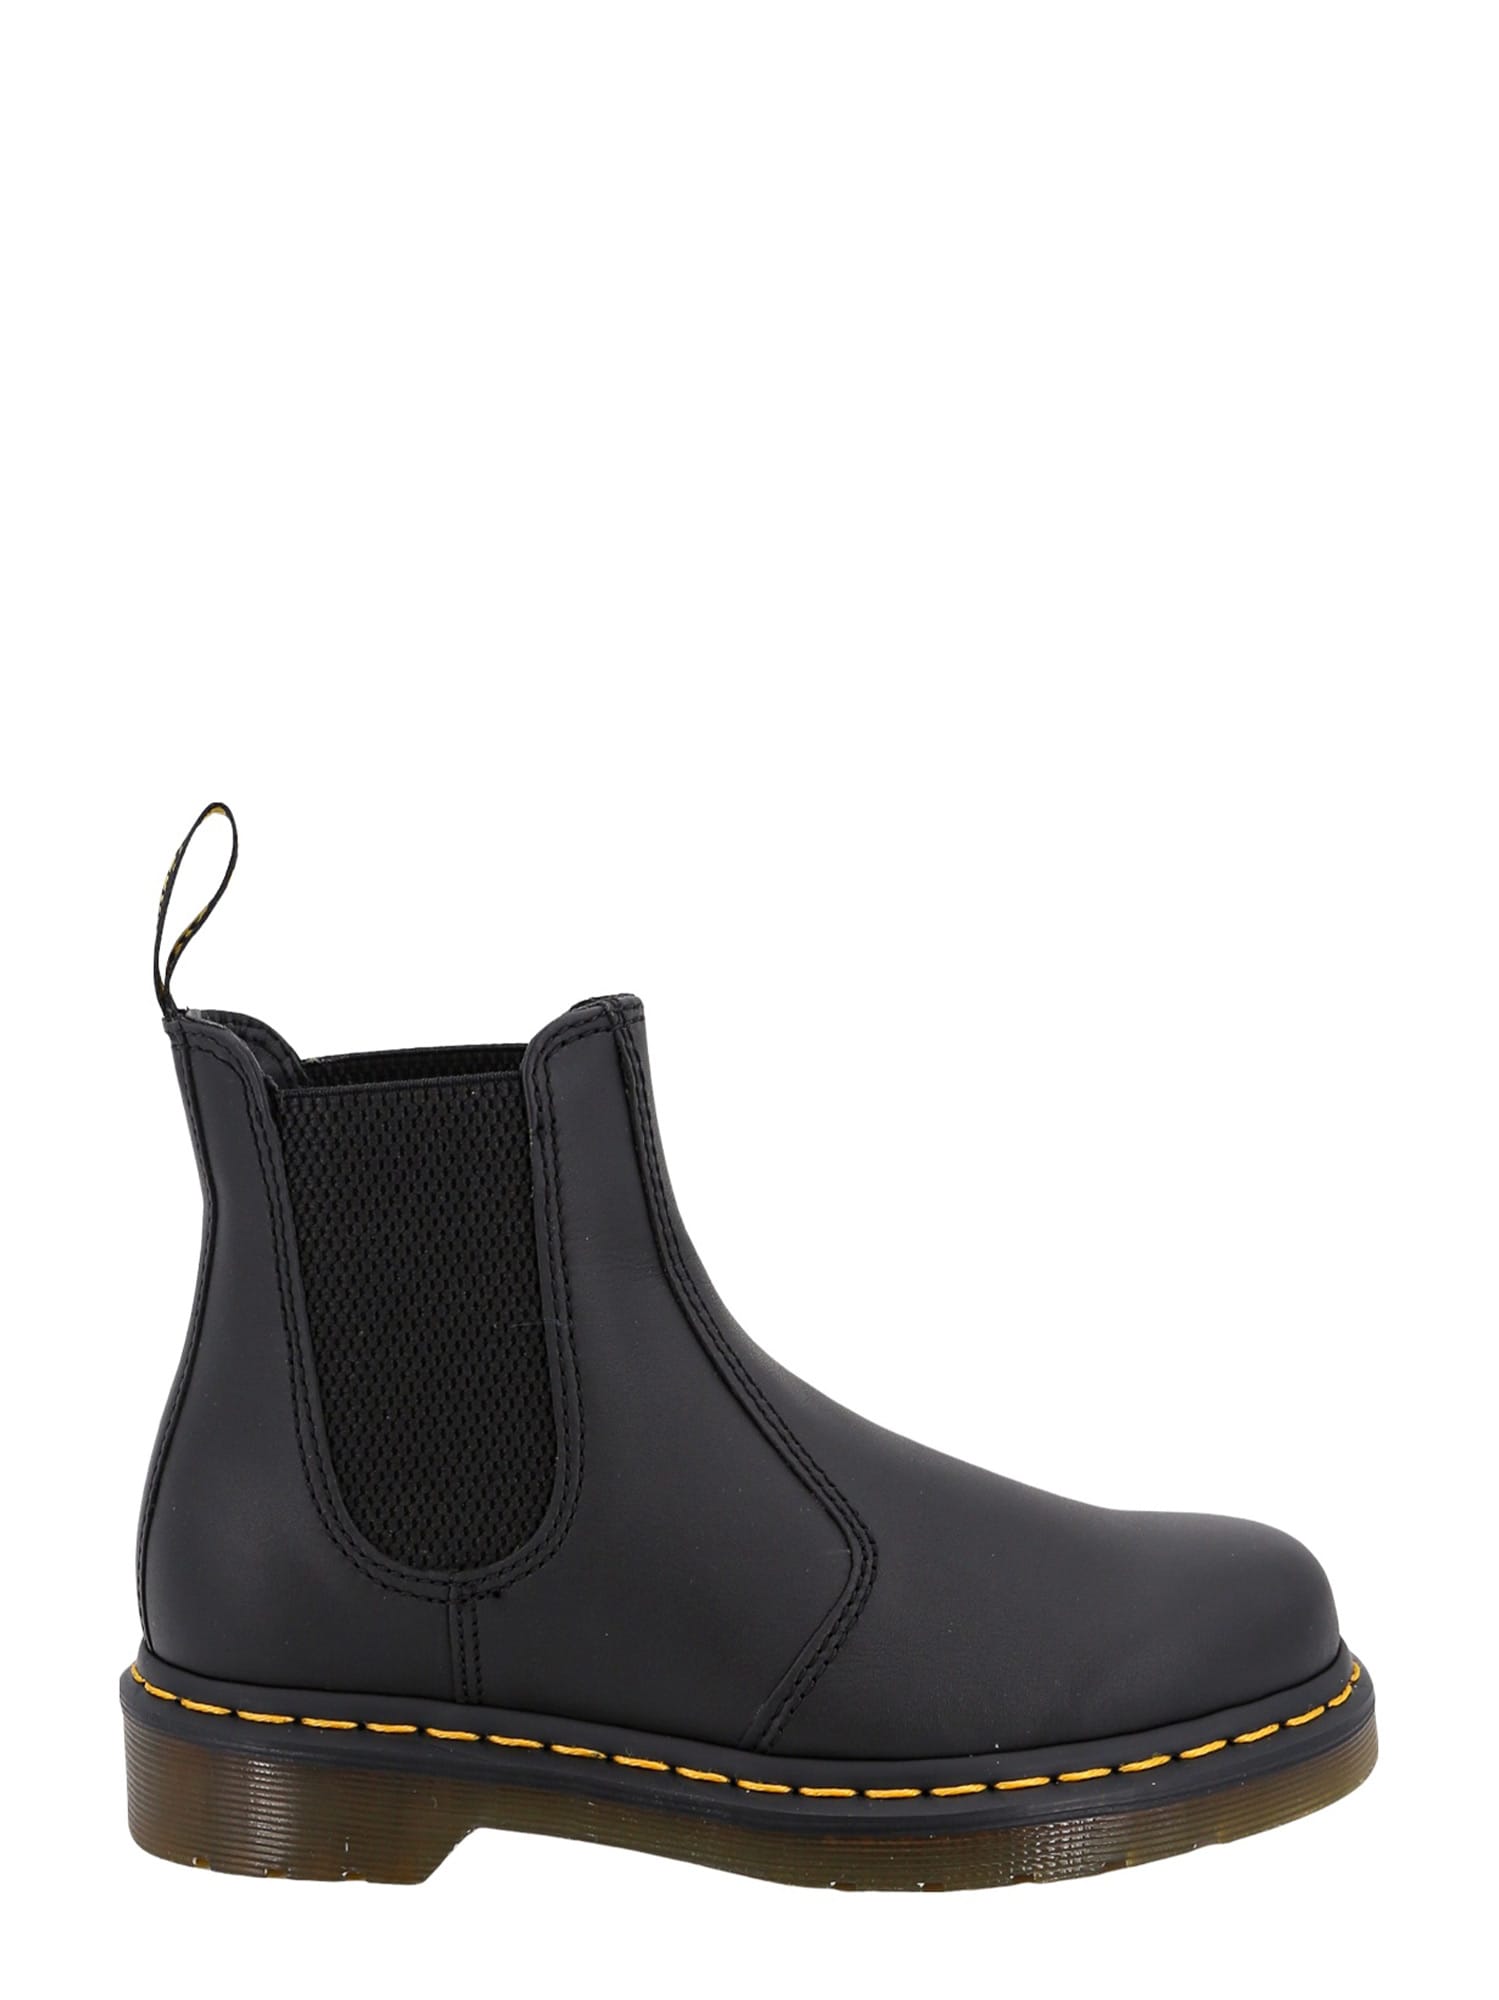 DR. MARTENS' 2976 LOW HEELS ANKLE BOOTS IN BLACK LEATHER